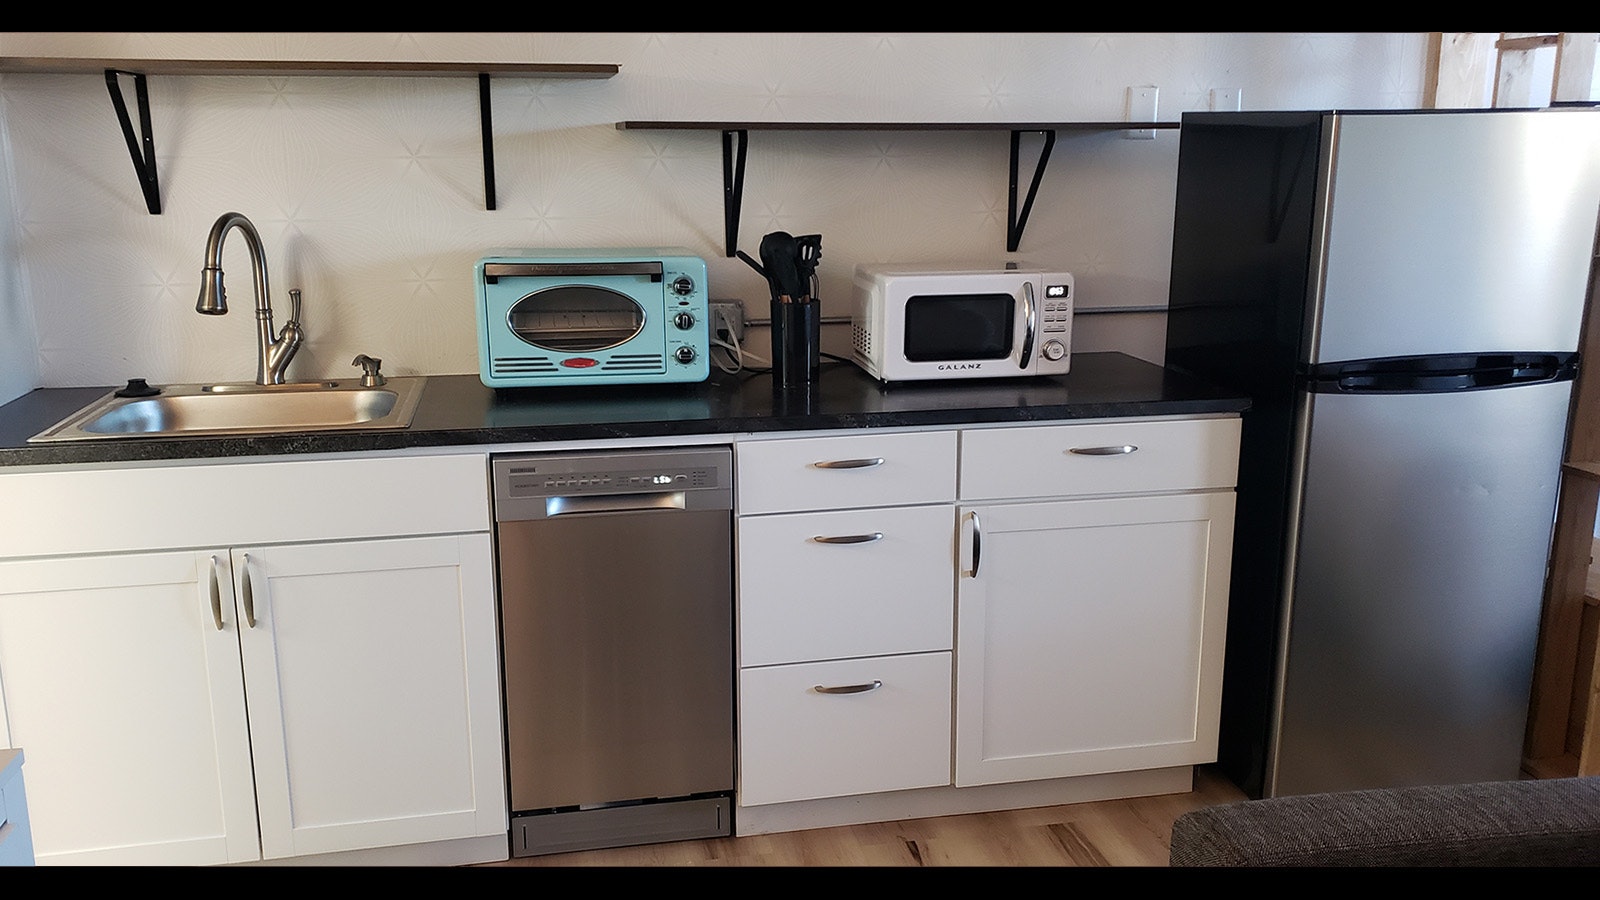 The kitchenettes include a colorful toaster and a microwave, as well as a small dishwasher, a refrigerator, a sink and cabinet space.